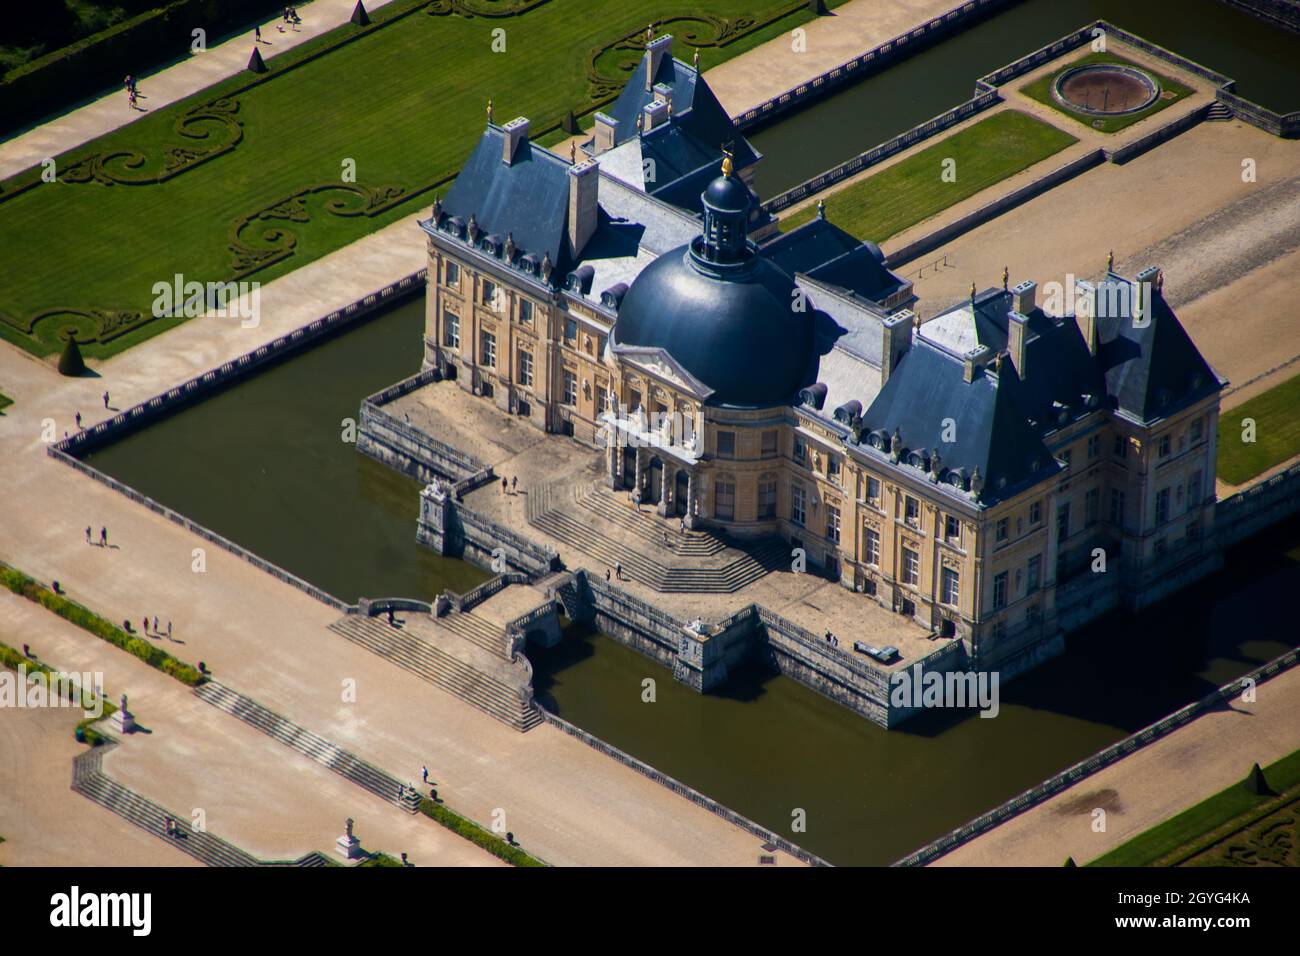 Aerial view of the castle and moat of Vaux le Vicomte near Paris and Melun in Seine et Marne, France - Classic palace built by Nicolas Fouquet, superi Stock Photo